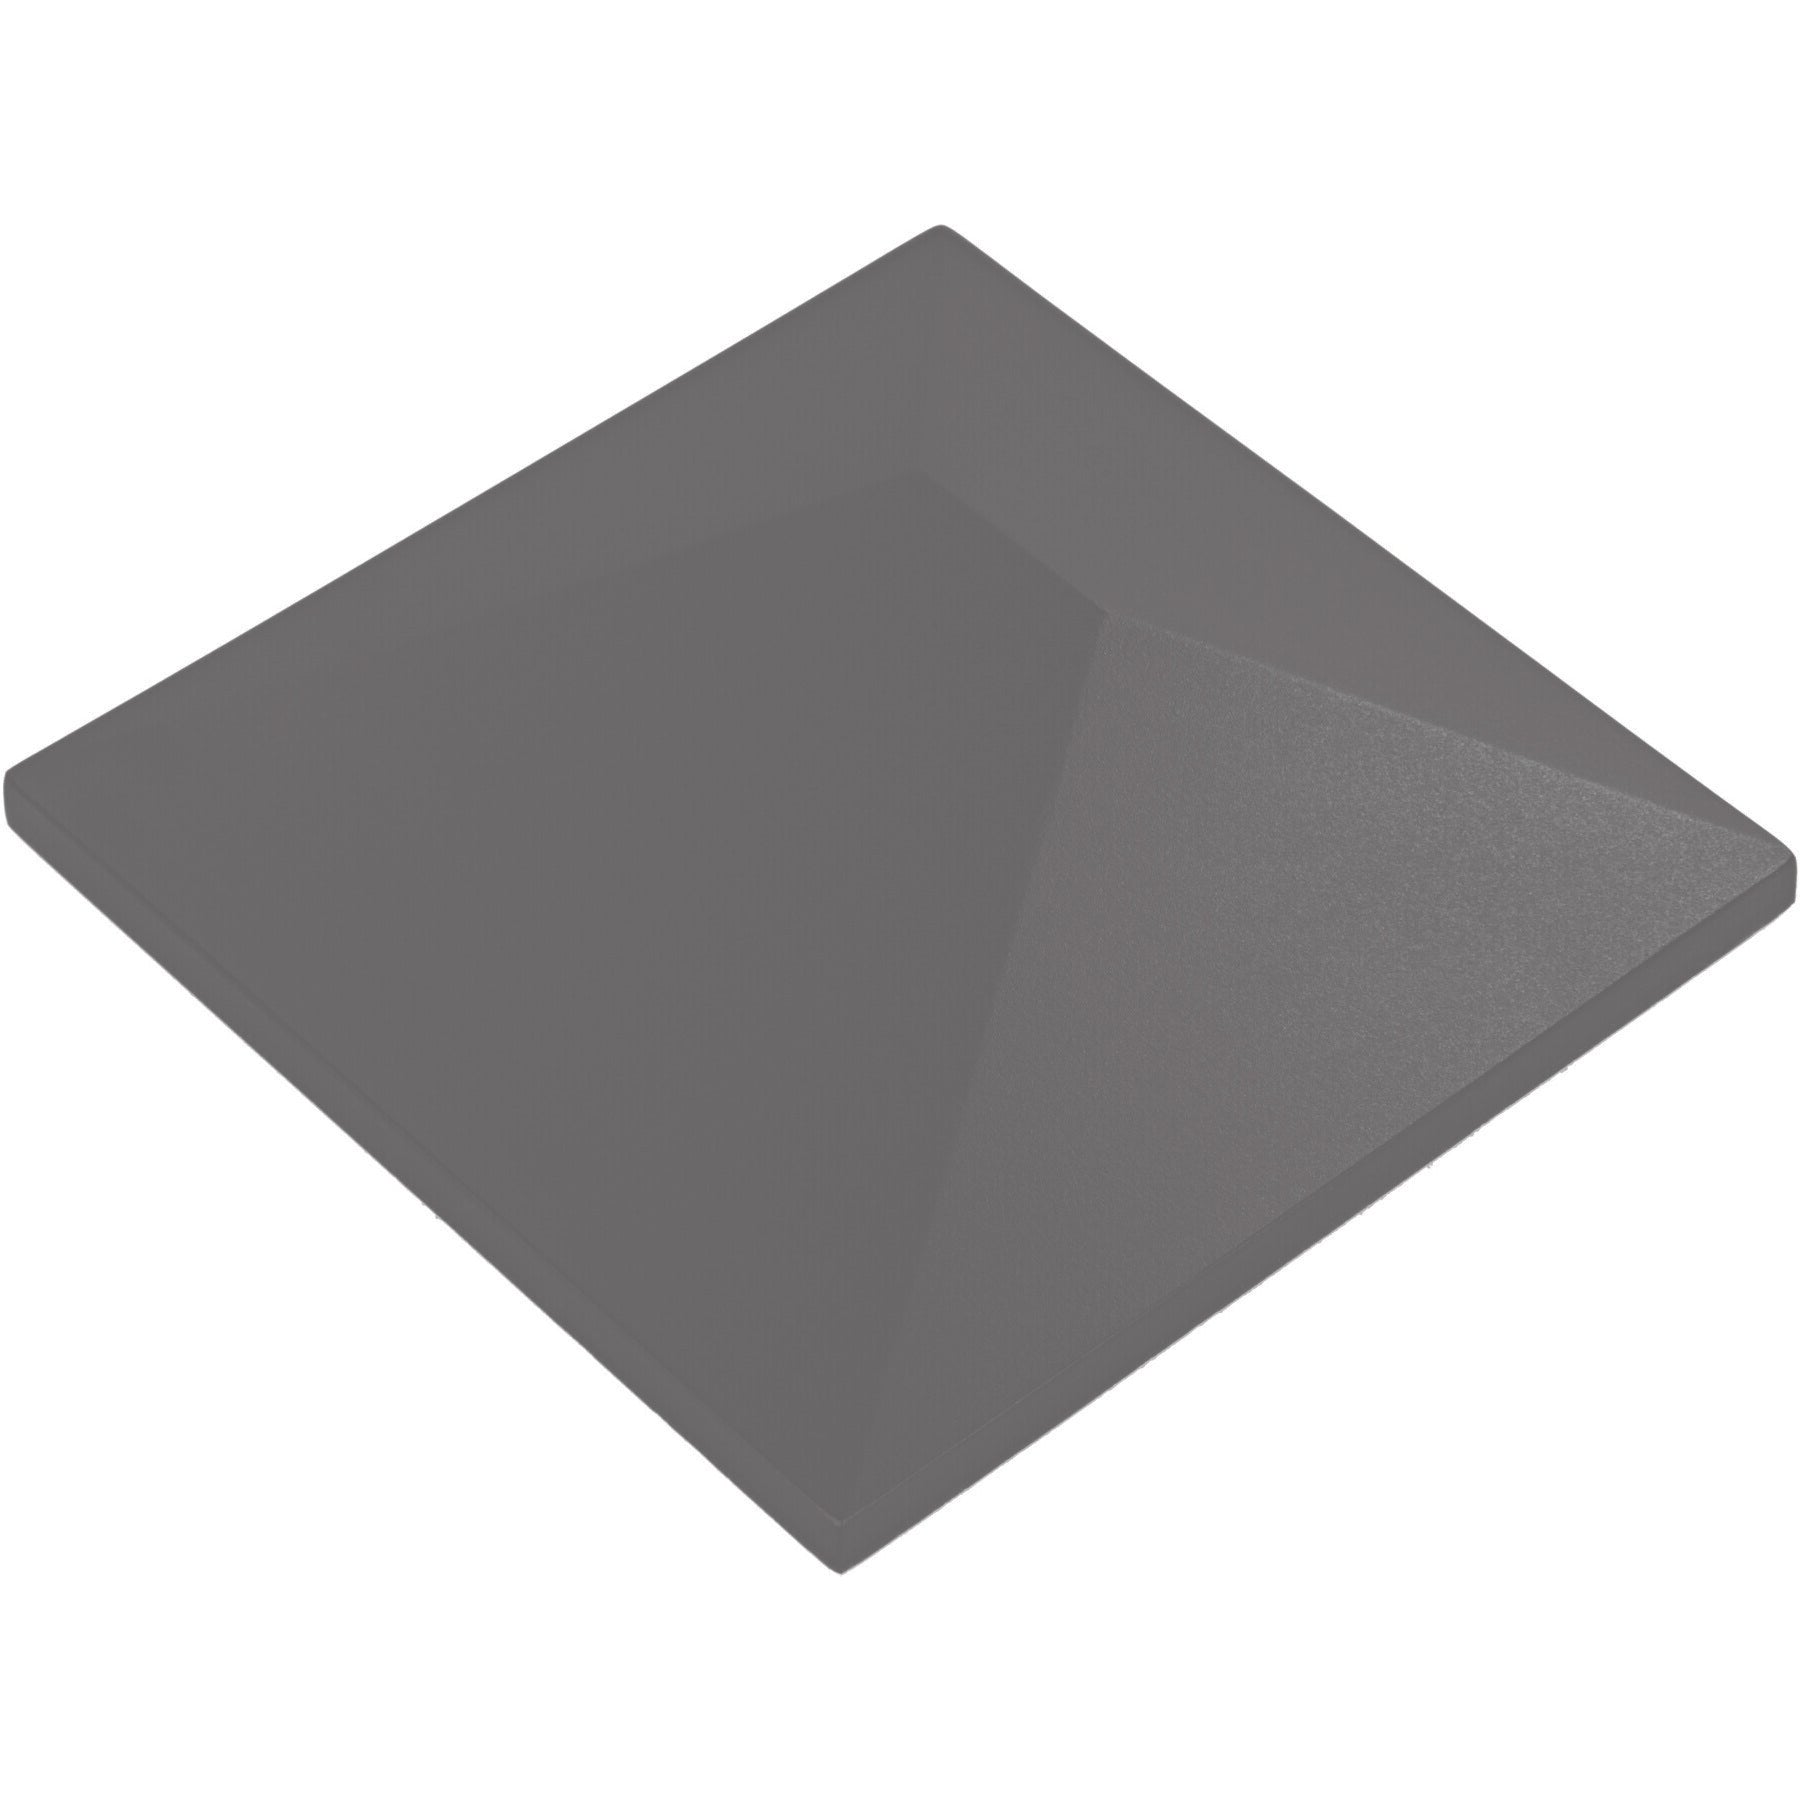 Daltile - STARE™ Collection - Electric 6 in. x 6 in. Tile - Apex Volt Carbon